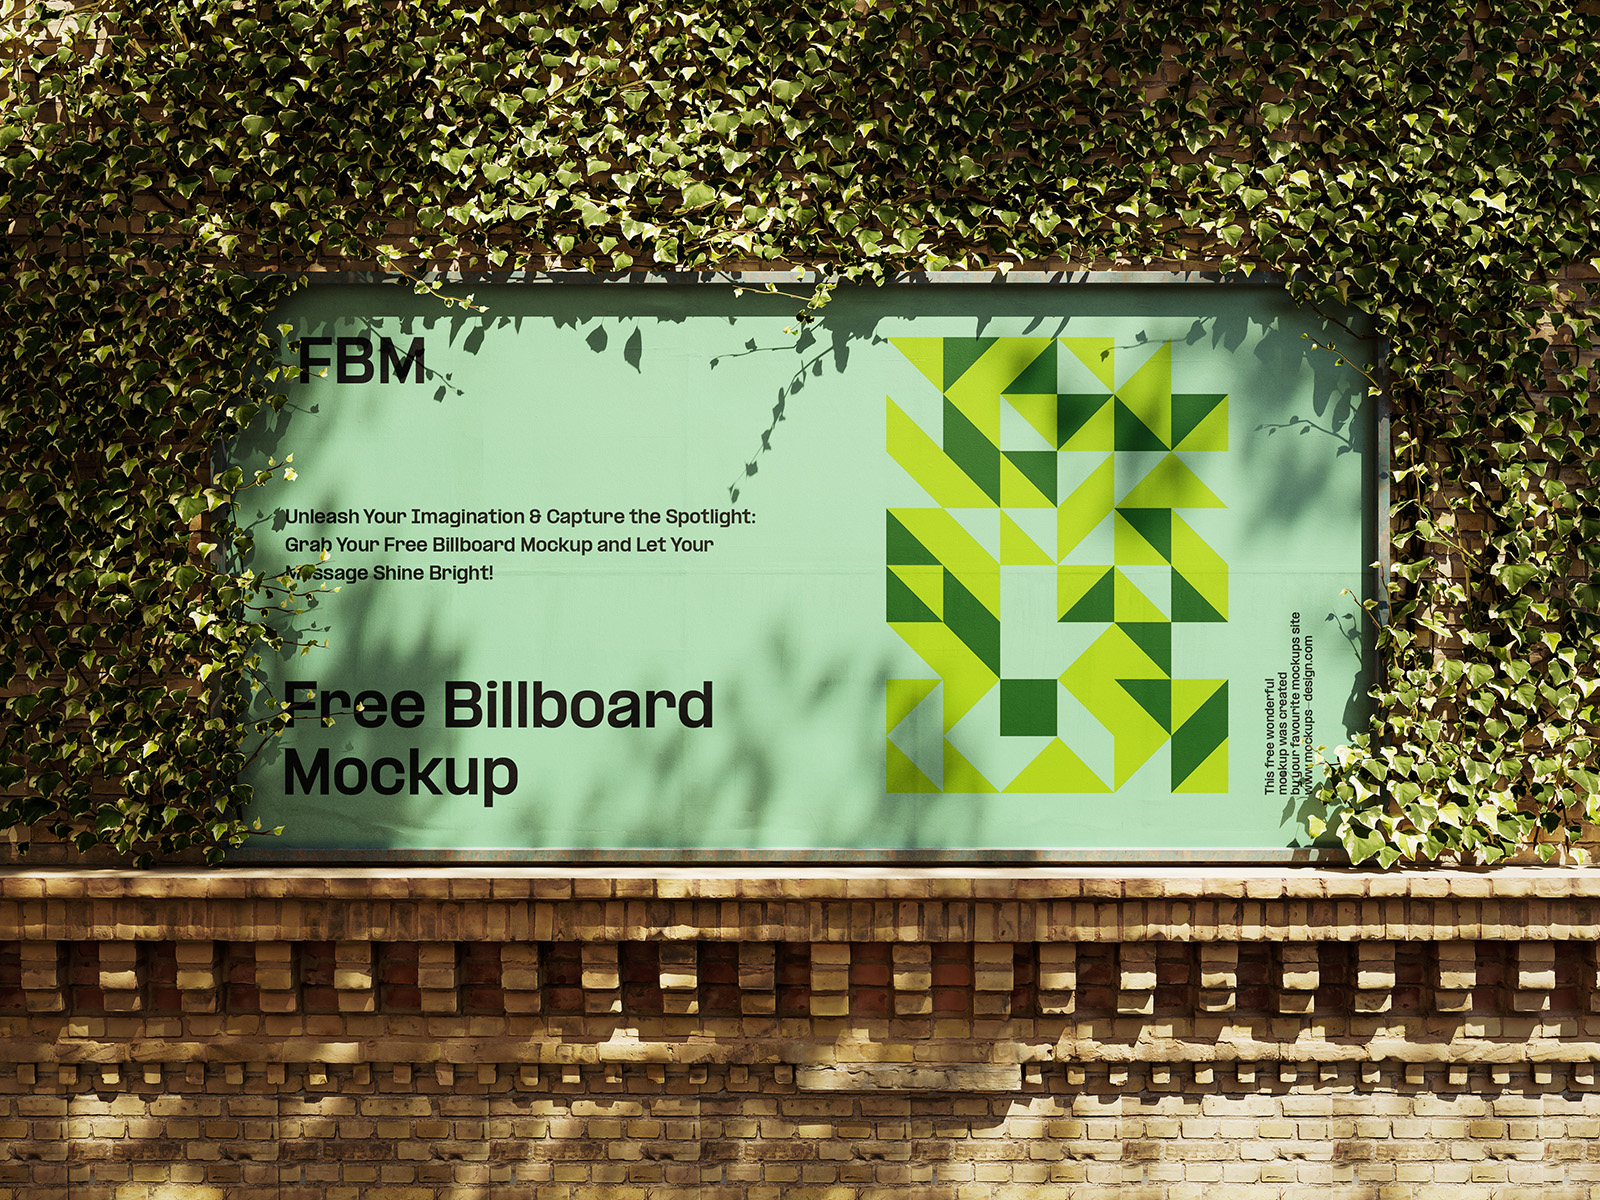 Billboard covered with ivy mockup